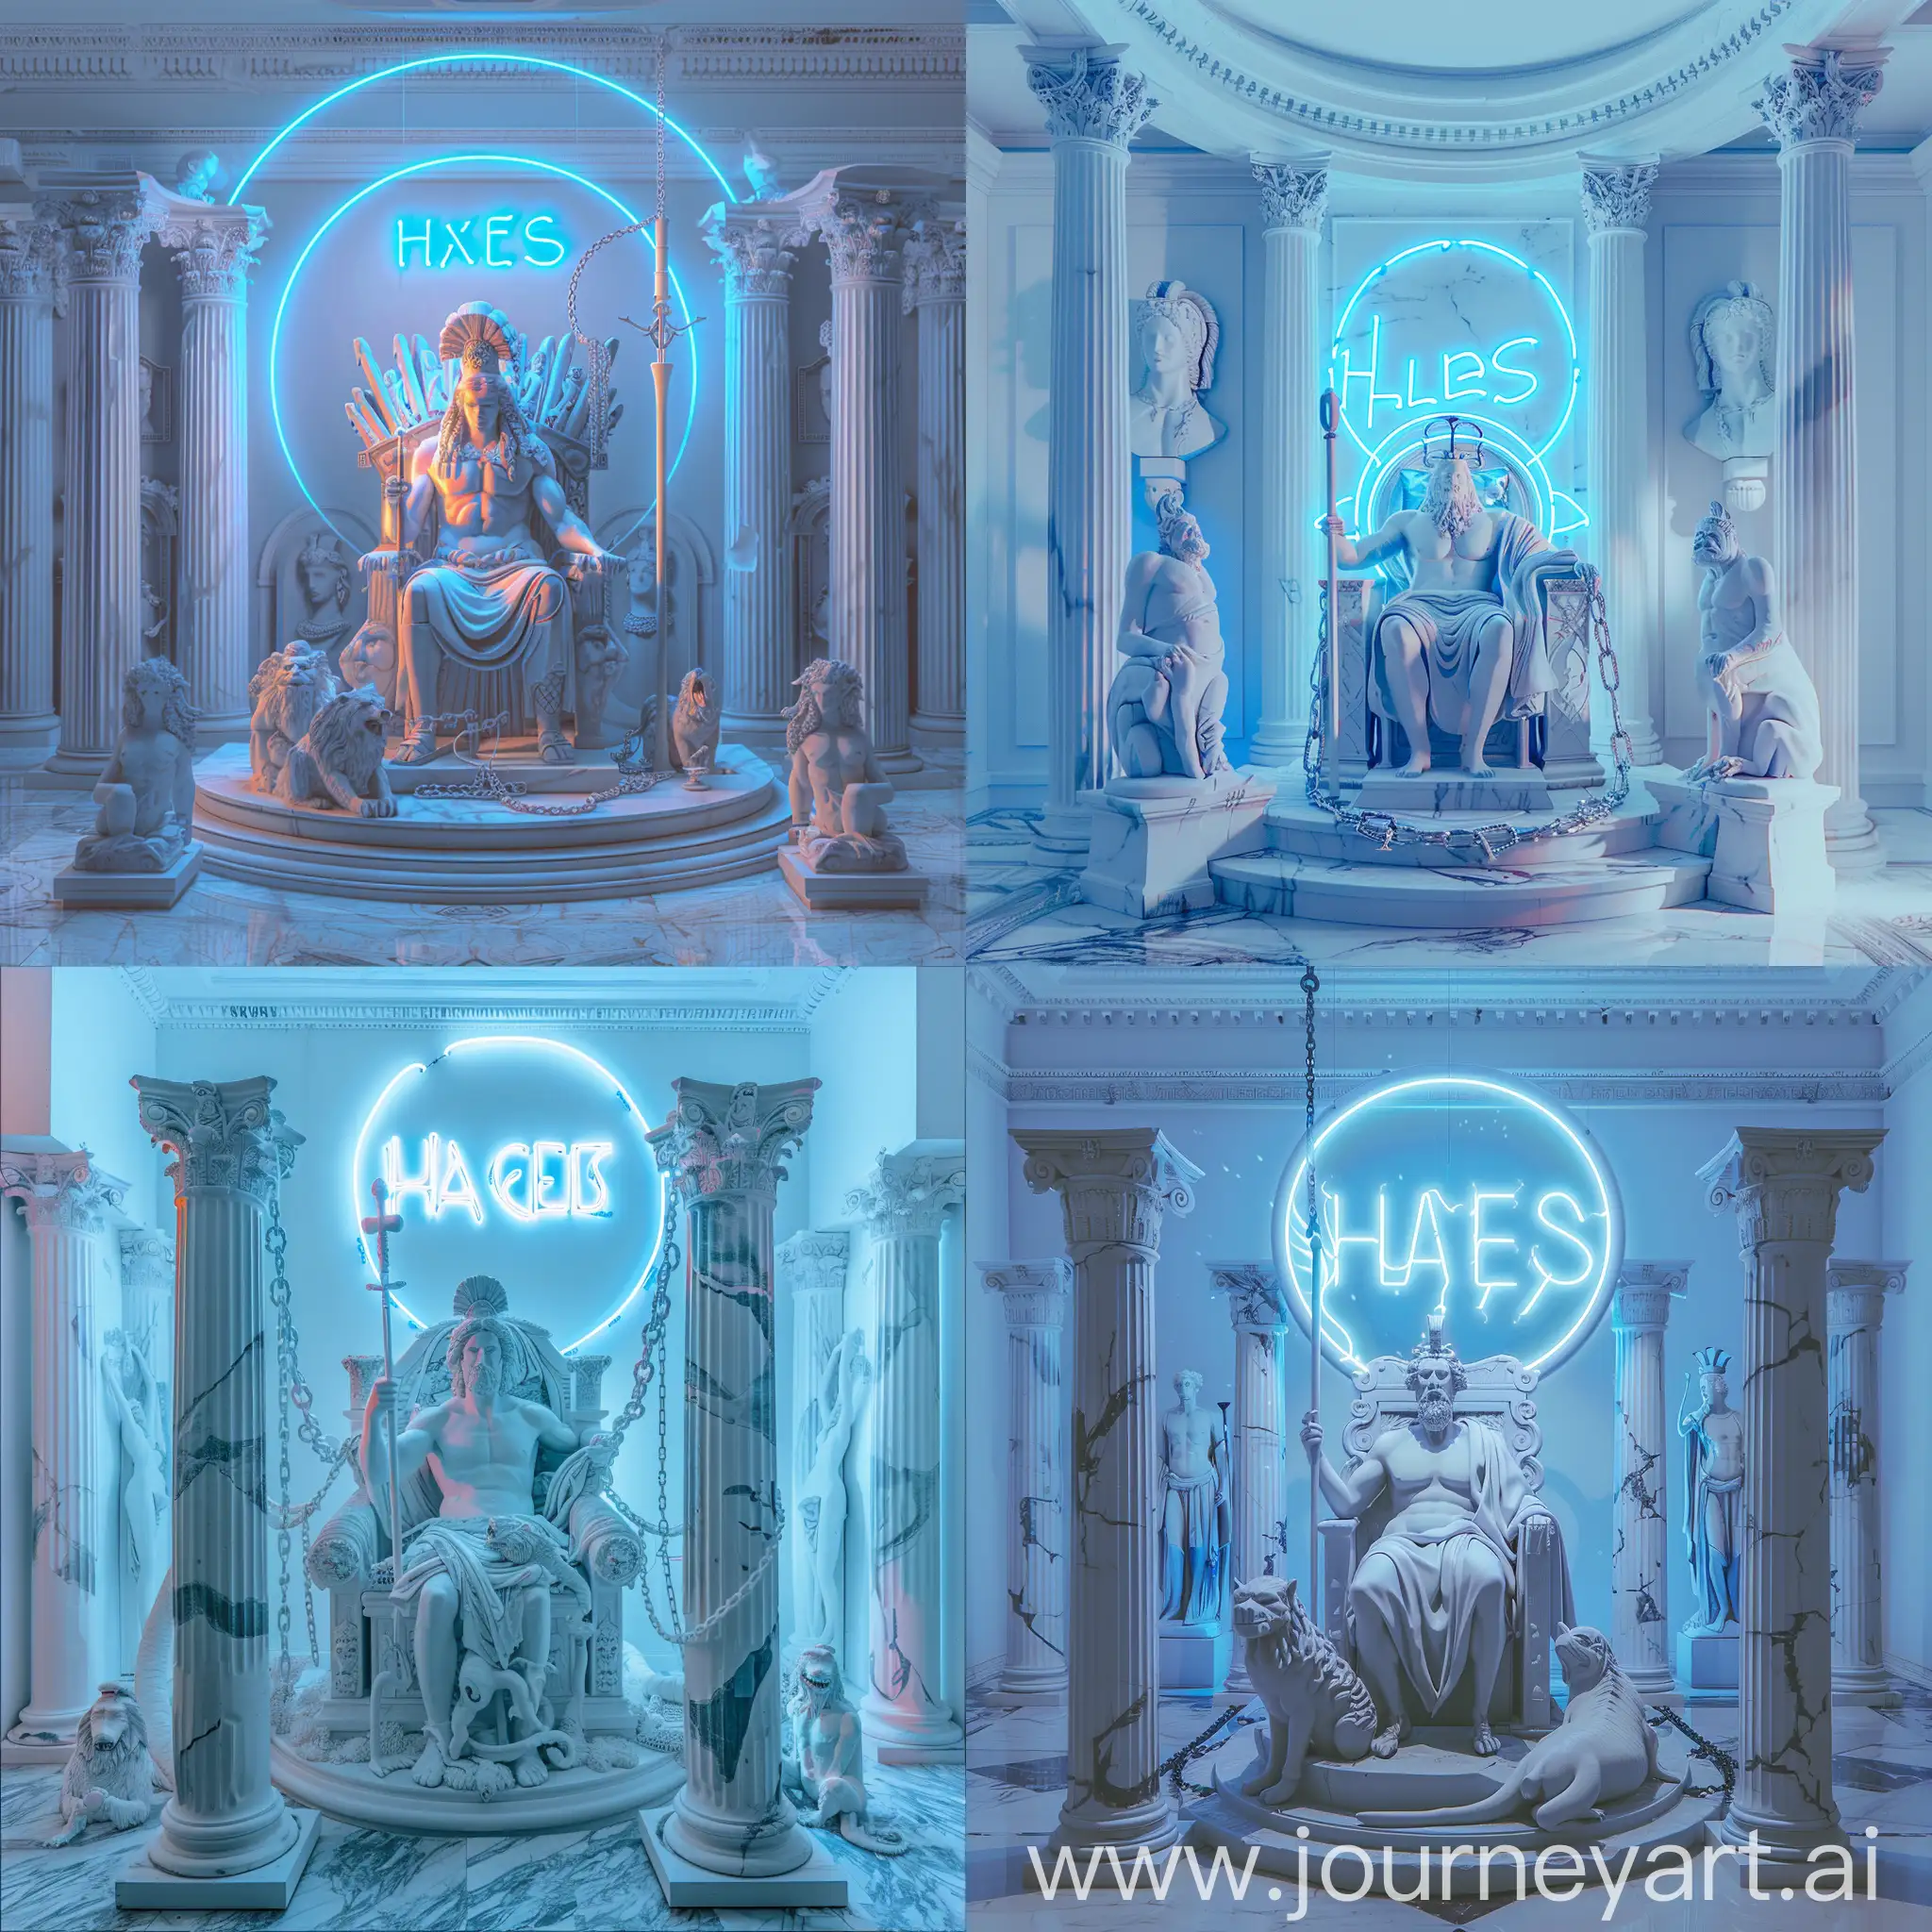 a room in which Hades sits on a throne. Everything is made of white marble. Hades has a staff in his right hand. In his left hand is a chain on which Cerberus is sitting. There are 2 pillars around Hades, which depict the faces of the stricken gods. Behind the throne of Hades, on the wall there is a huge neon inscription Hades, it is located in a circle of neon blue. Neon has a bluish tint